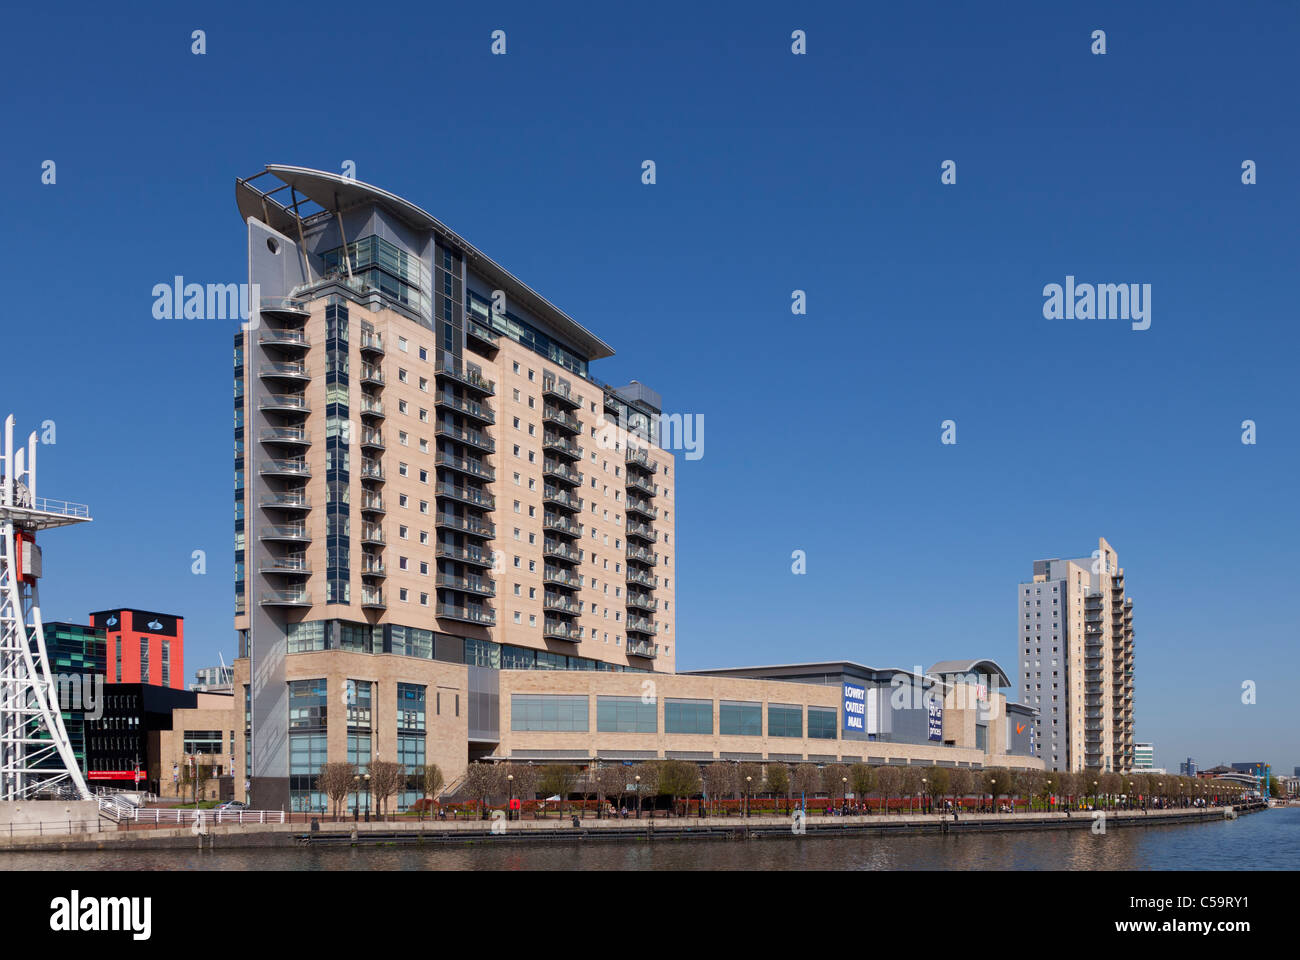 Lowry Outlet Mall, Salford Quays, Greater Manchester, England Stockfoto